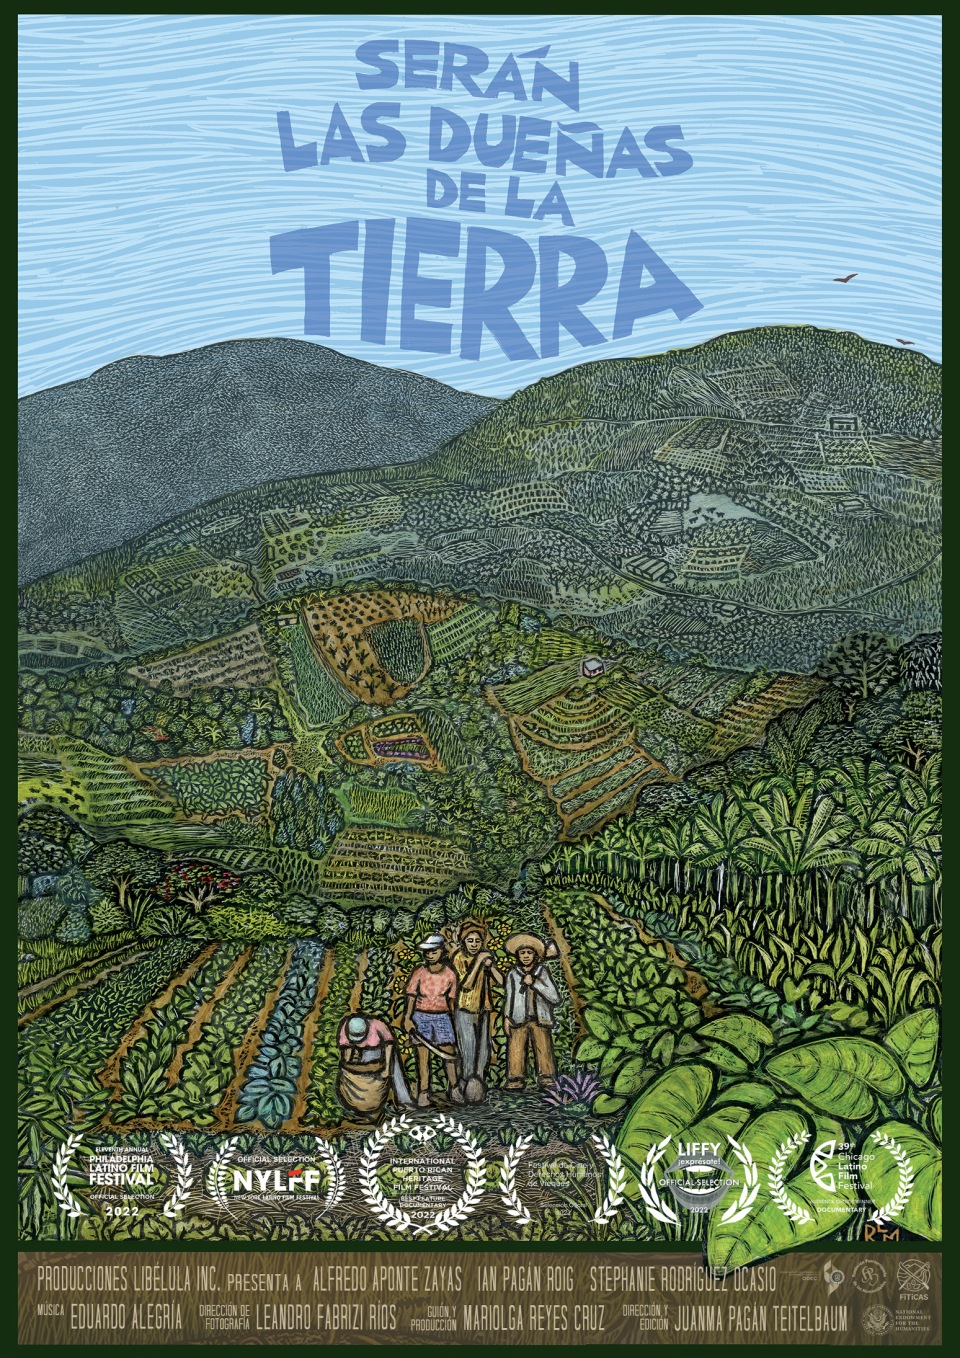 The words "Serán las dueñas de la tierra" float in the sky, mimicing the shape of the hills below that stretch down to a valley growing food, accolades and text compose the bottom of the frame. 